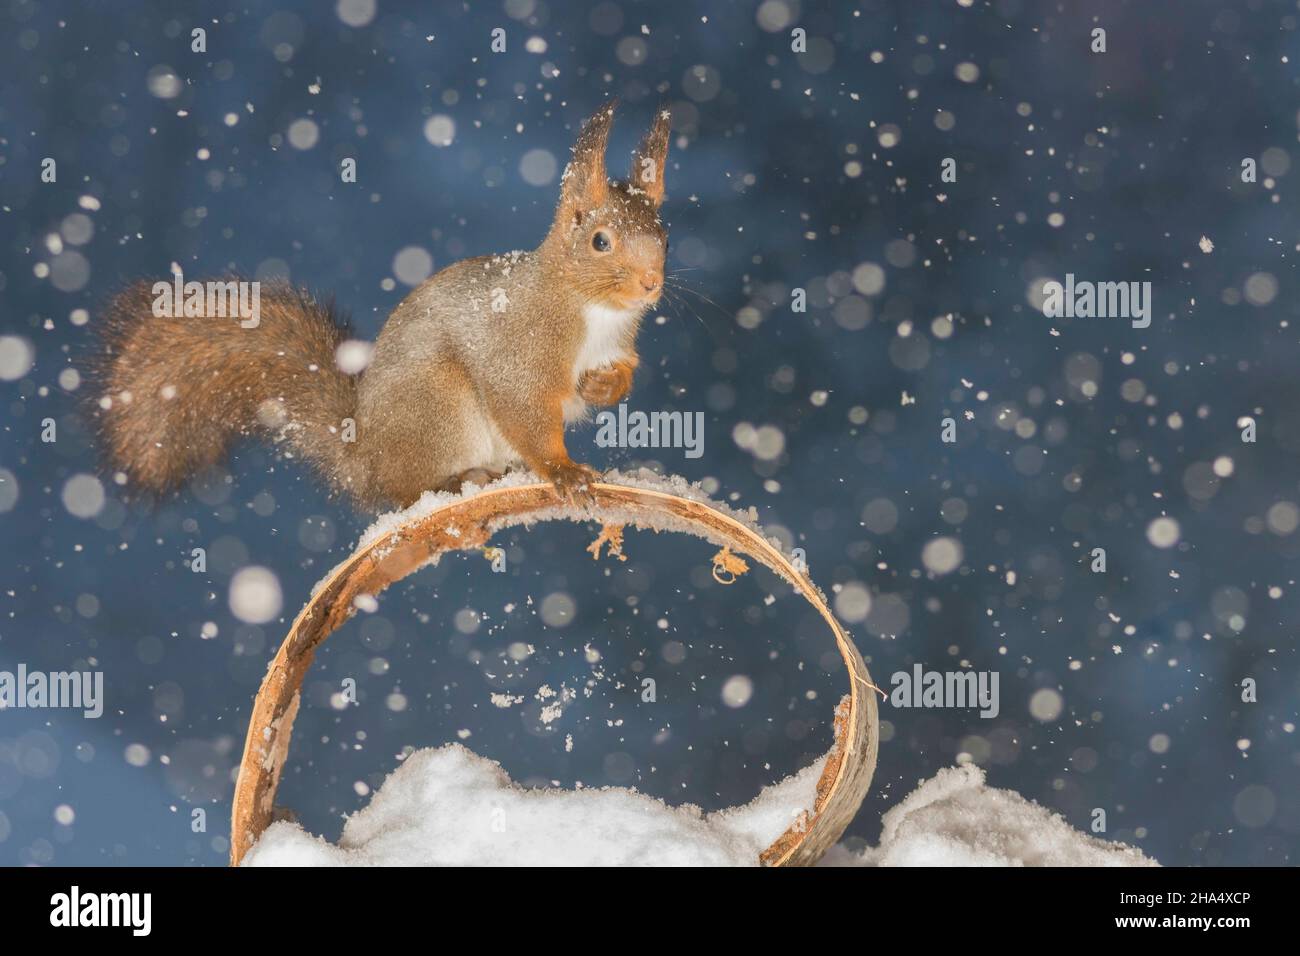 profile and close up of a red squirrel on round wood whil it is snowing Stock Photo